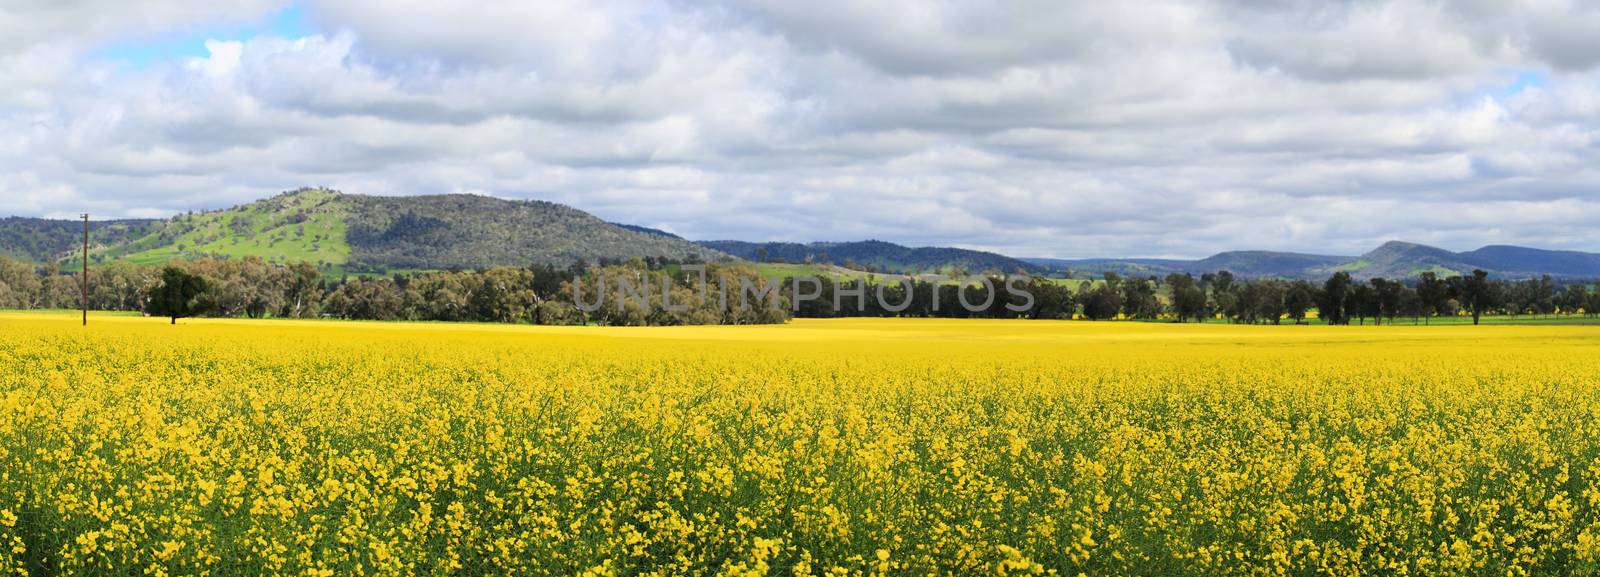 Beautiful views of Canola fields at Wattamondara.  Focus to foreground only